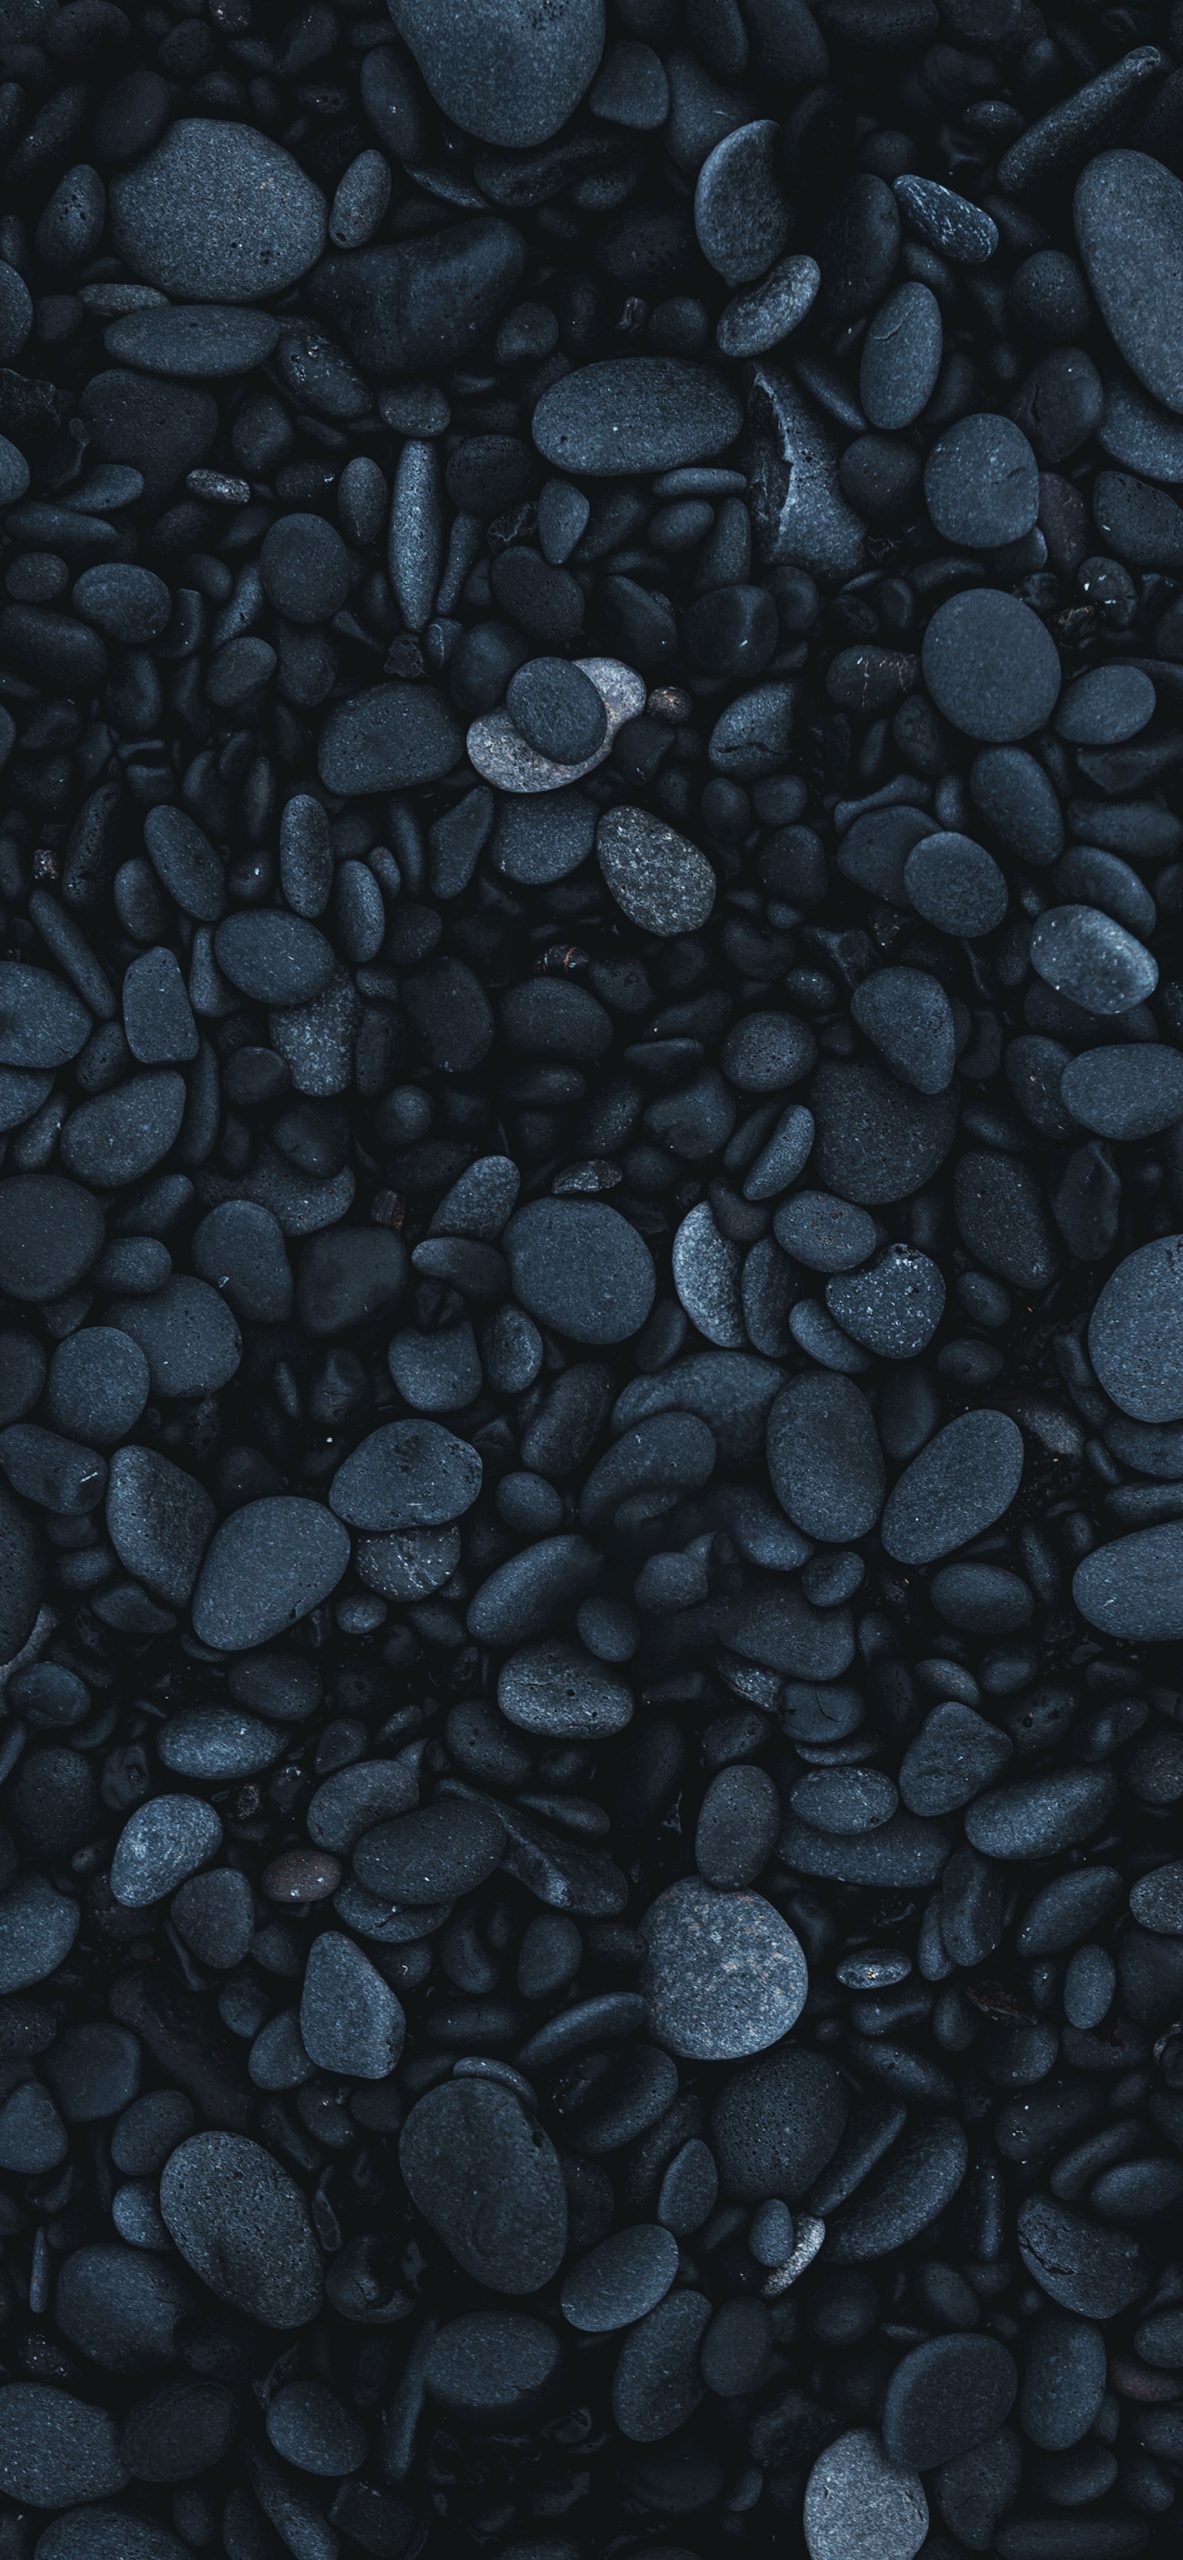 Plenty Of Black Small Pebble Stones For Wallpaper , Captured In Close Up  Stock Photo, Picture And Royalty Free Image. Image 38972307.